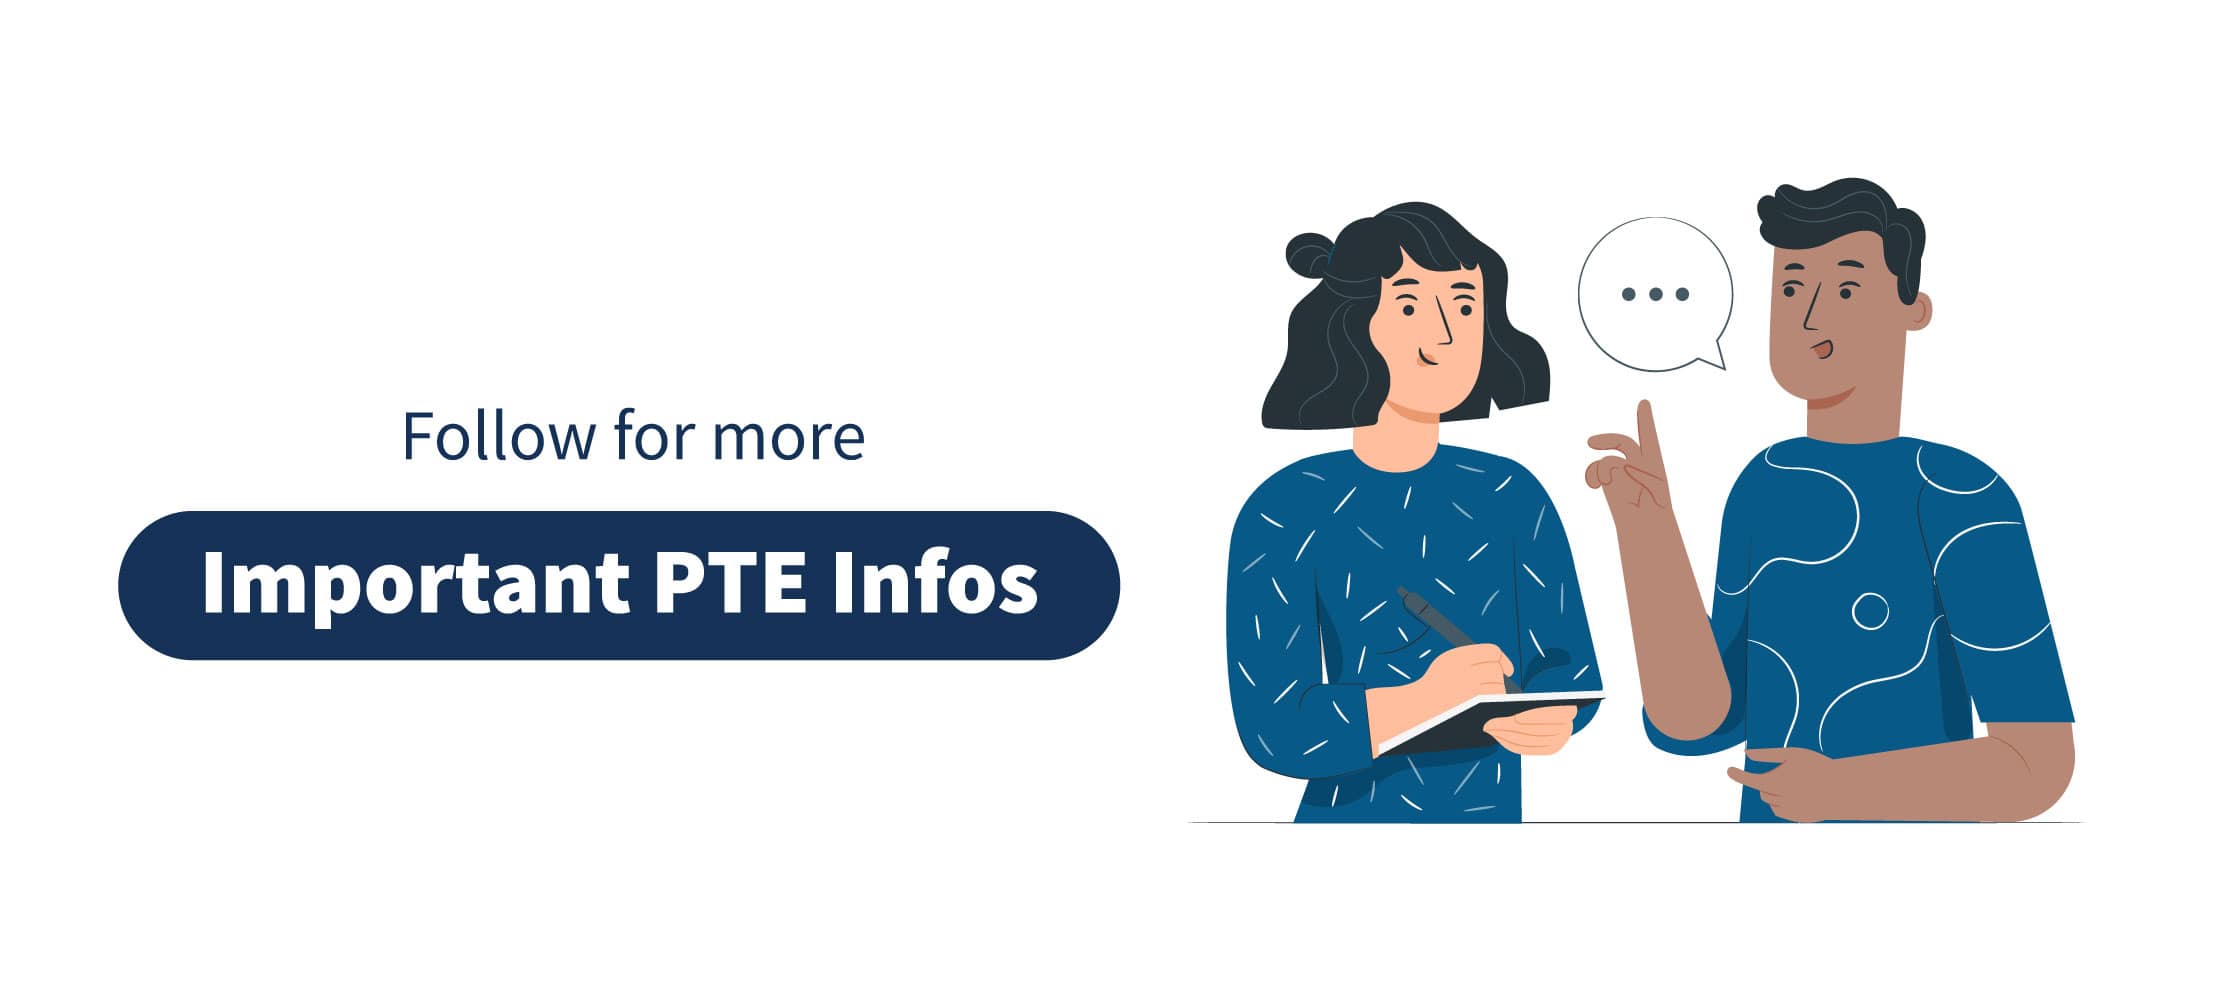 PTE Tips and Tricks Info